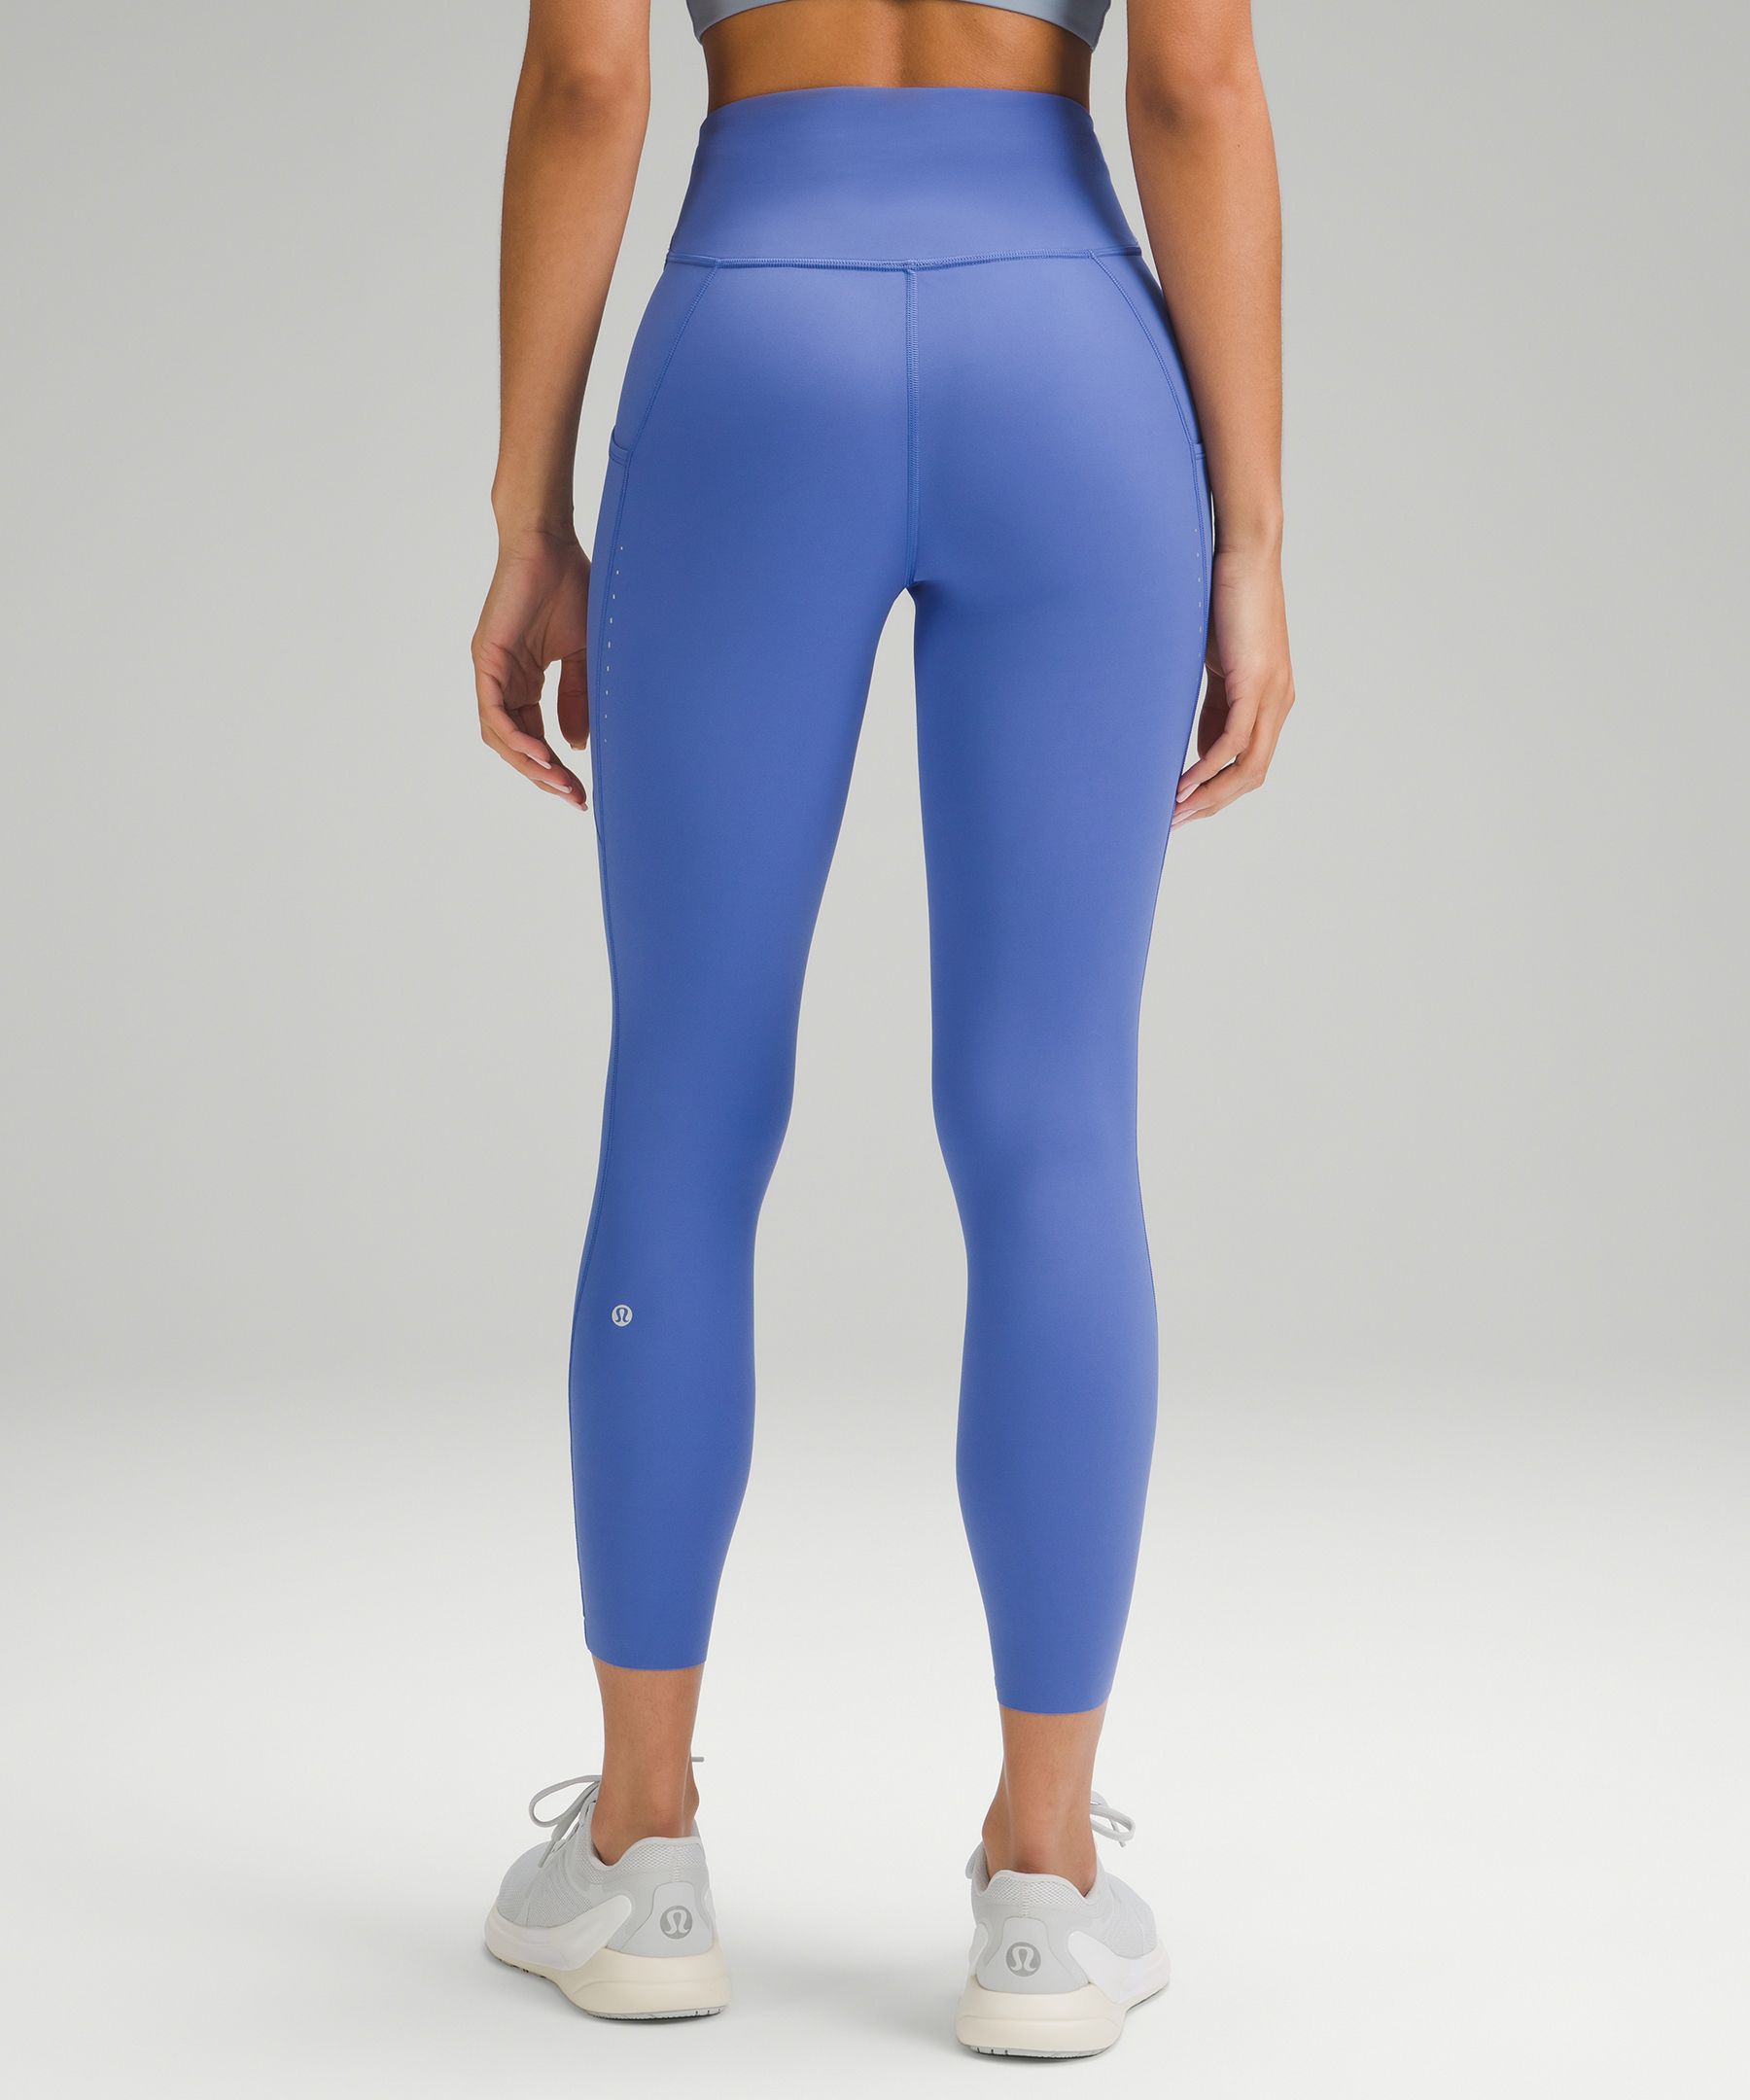 Fast and Free High-Rise Tight 25” Pockets *Updated, Women's Leggings/Tights